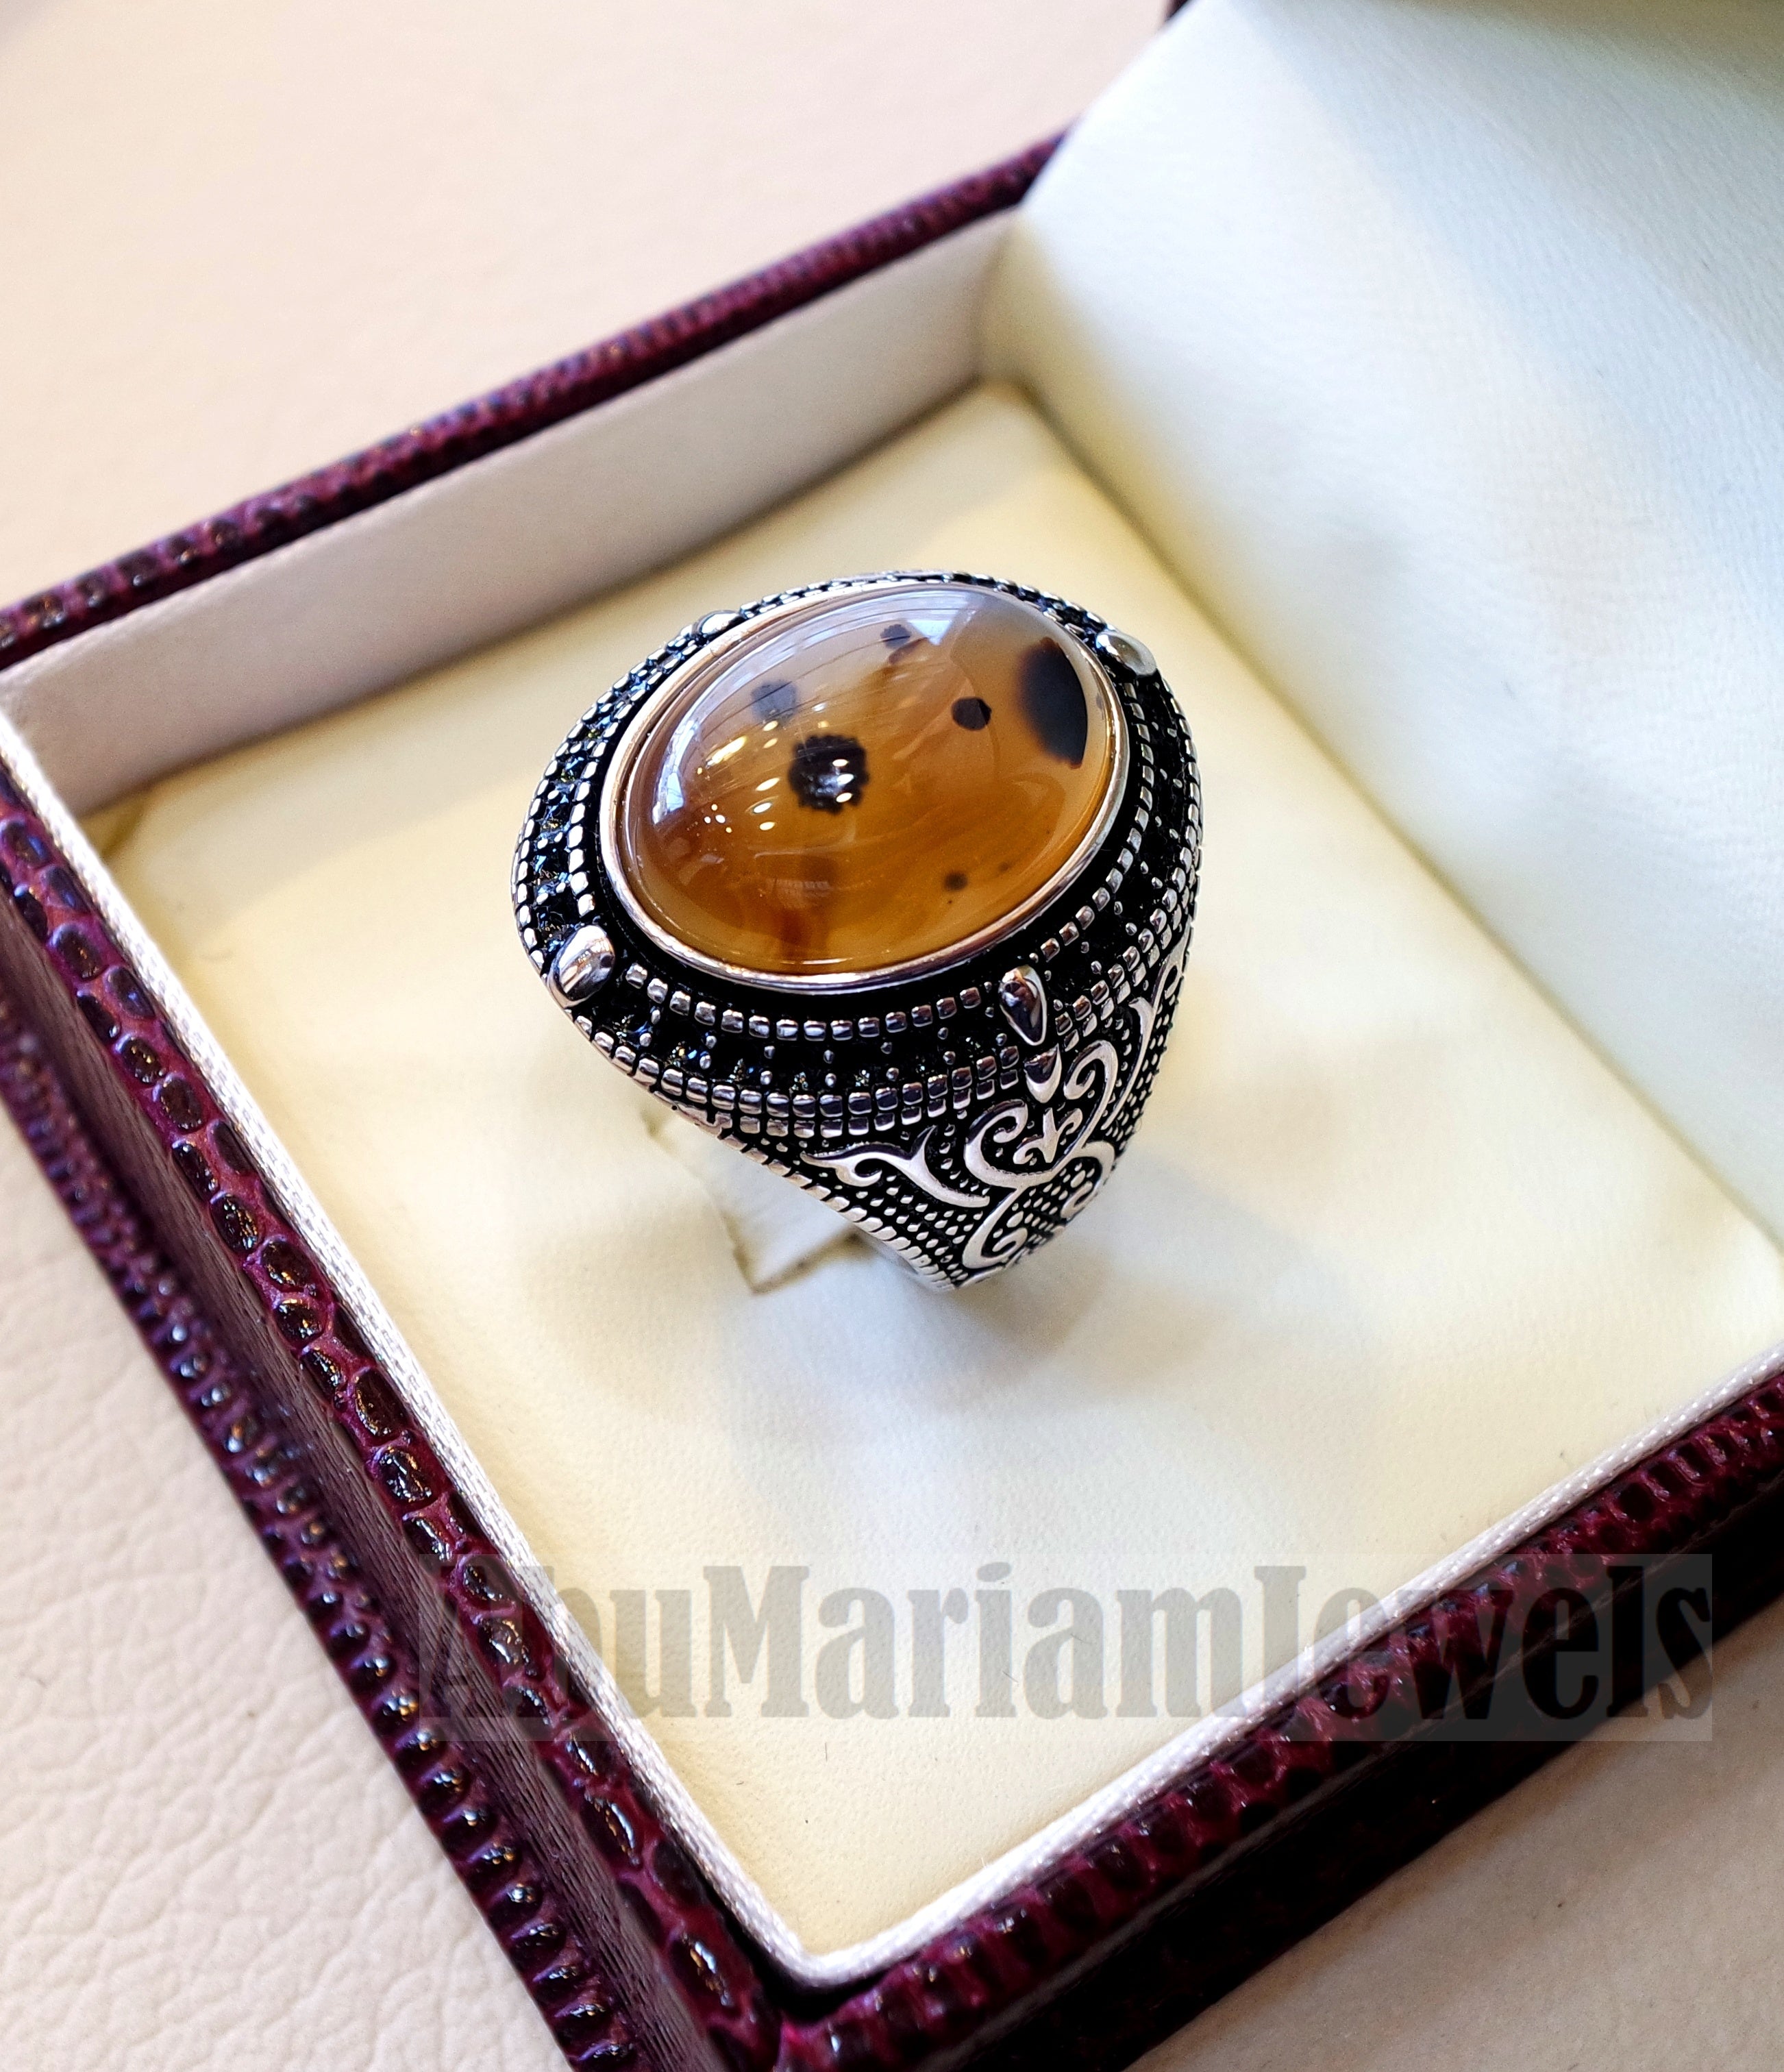 yamani aqeeq Akik , akeek natural oval multi color agate gemstone men ring sterling silver 925 jewelry all sizes عقيق يماني